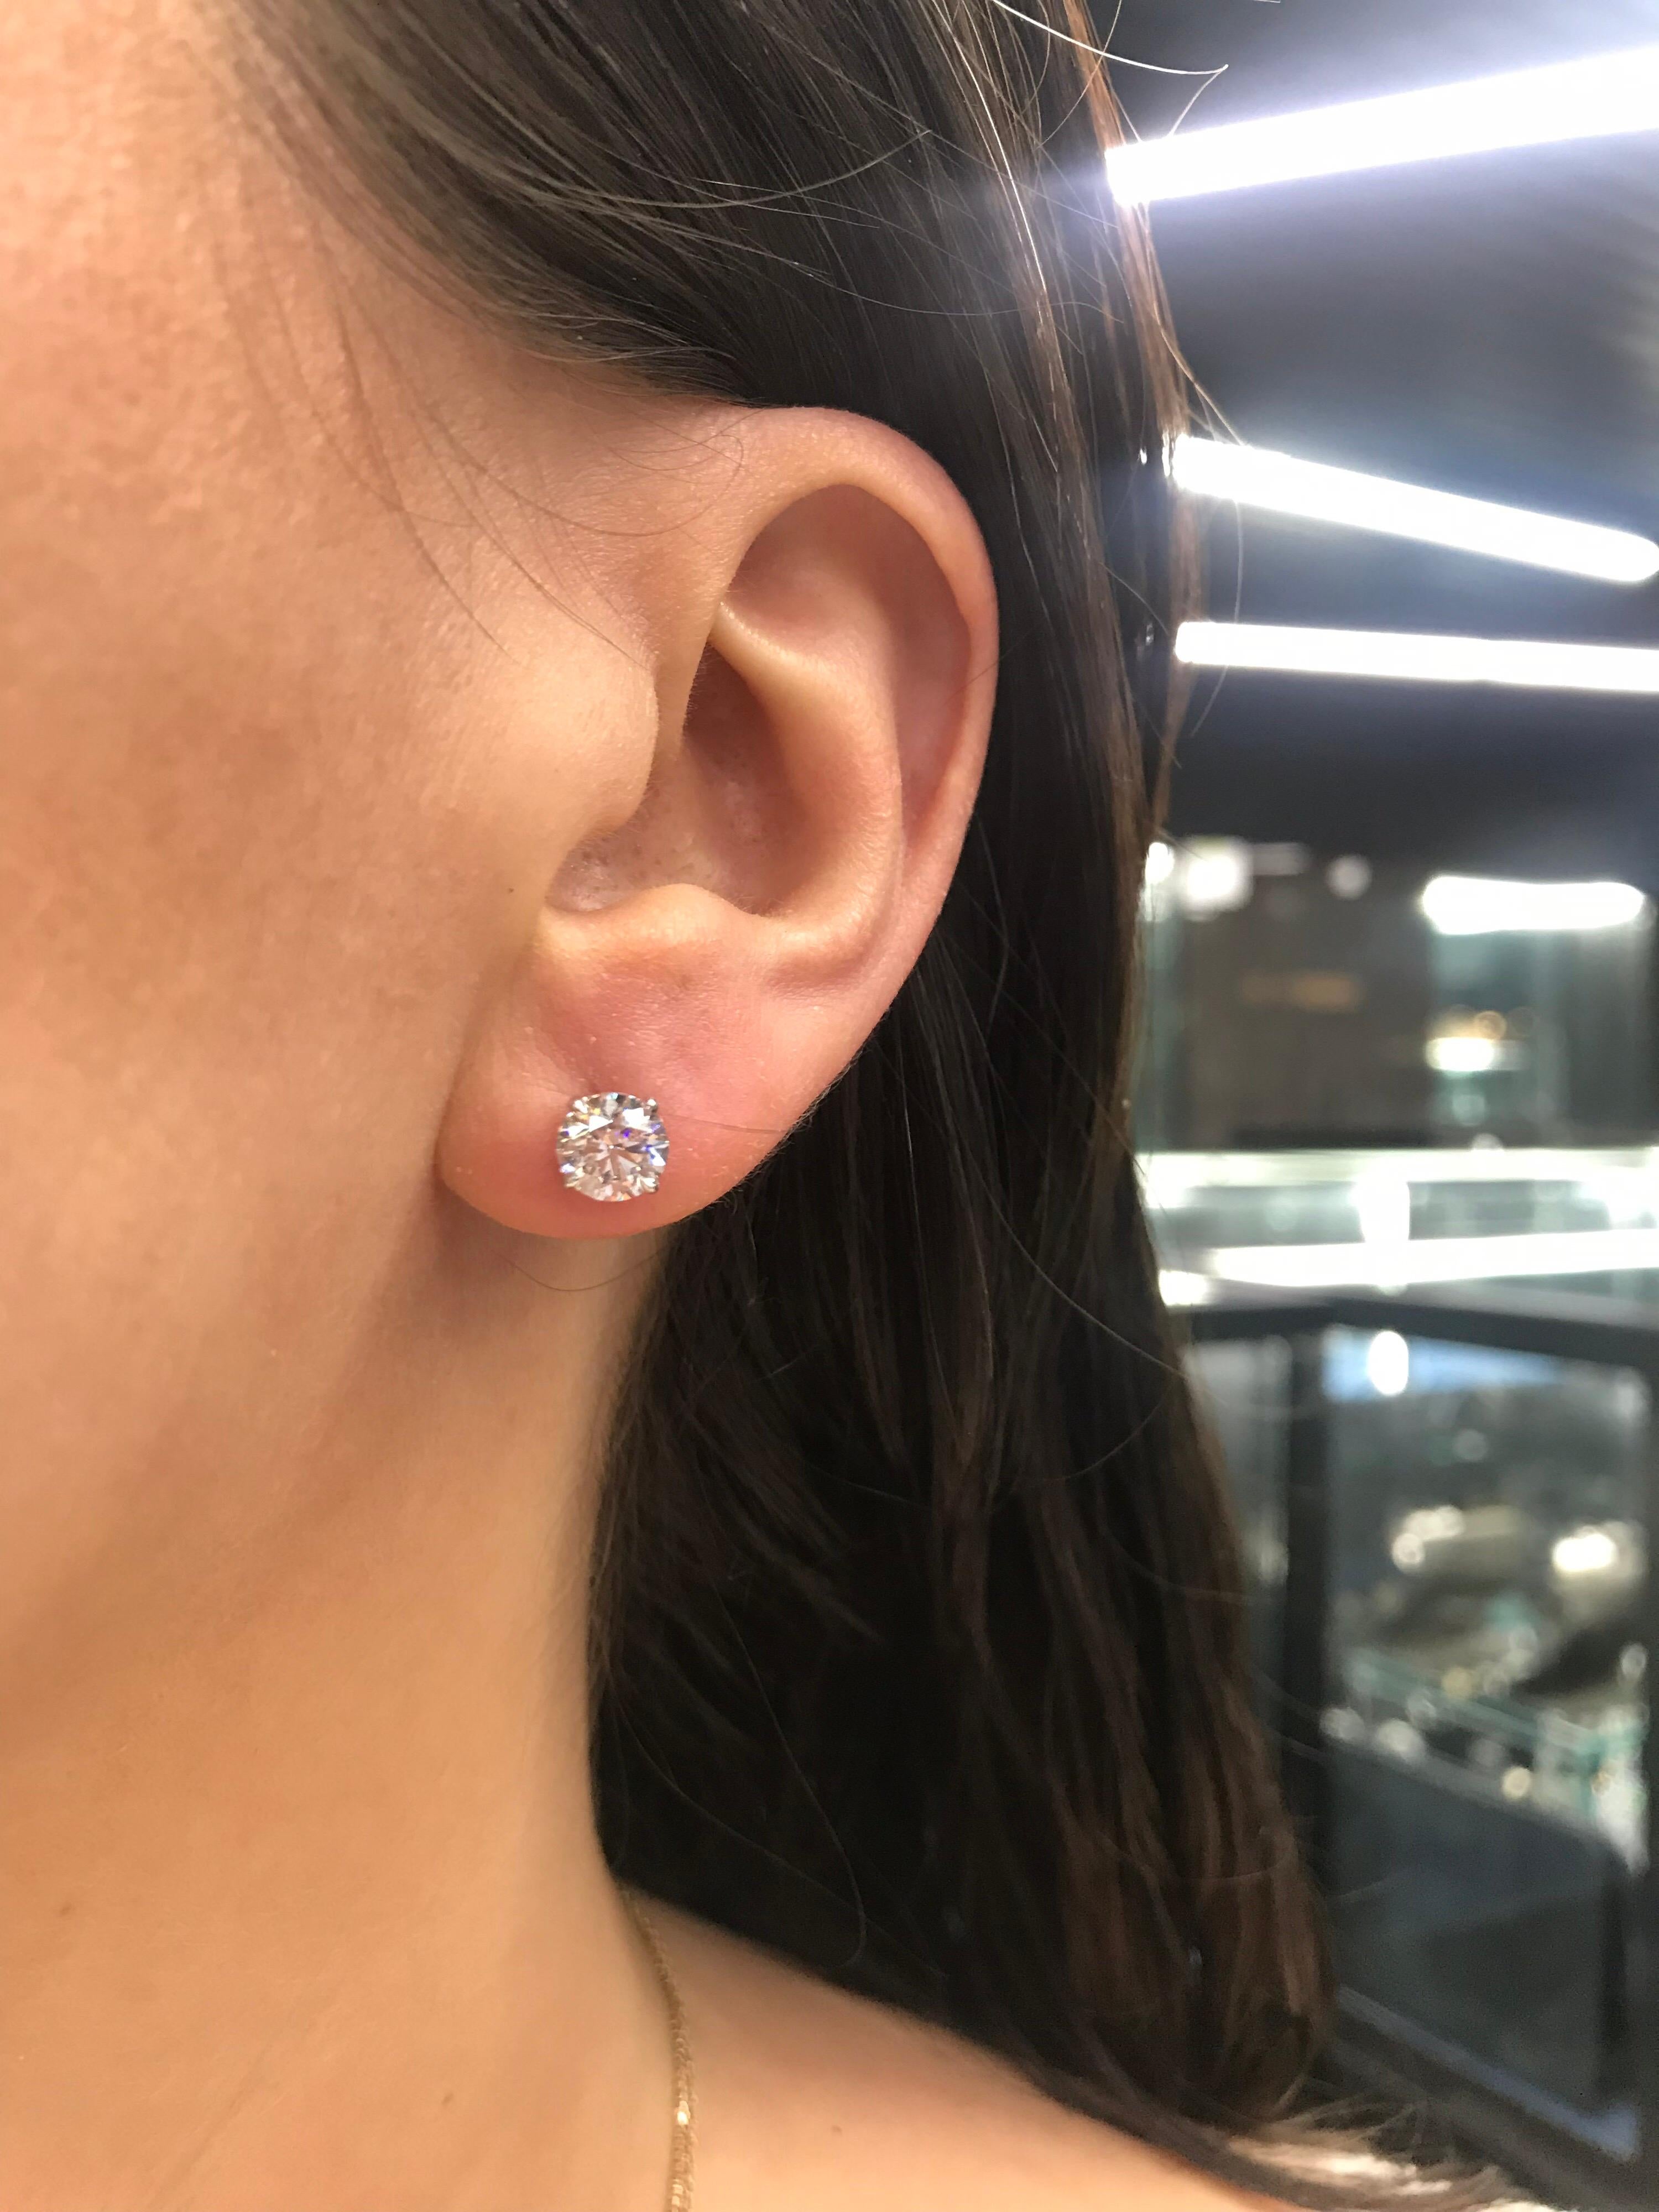 GIA Certified Diamond Stud earrings weighing 2.01 carats in an 18k white gold 4 prong champagne setting.
Color: F
Clarity: SI2
Setting can be changed to a Basket, Martini or Champagne/ 3 or 4 Prong/ 14 or 18 Gold Karat.
DM for more Info.
More